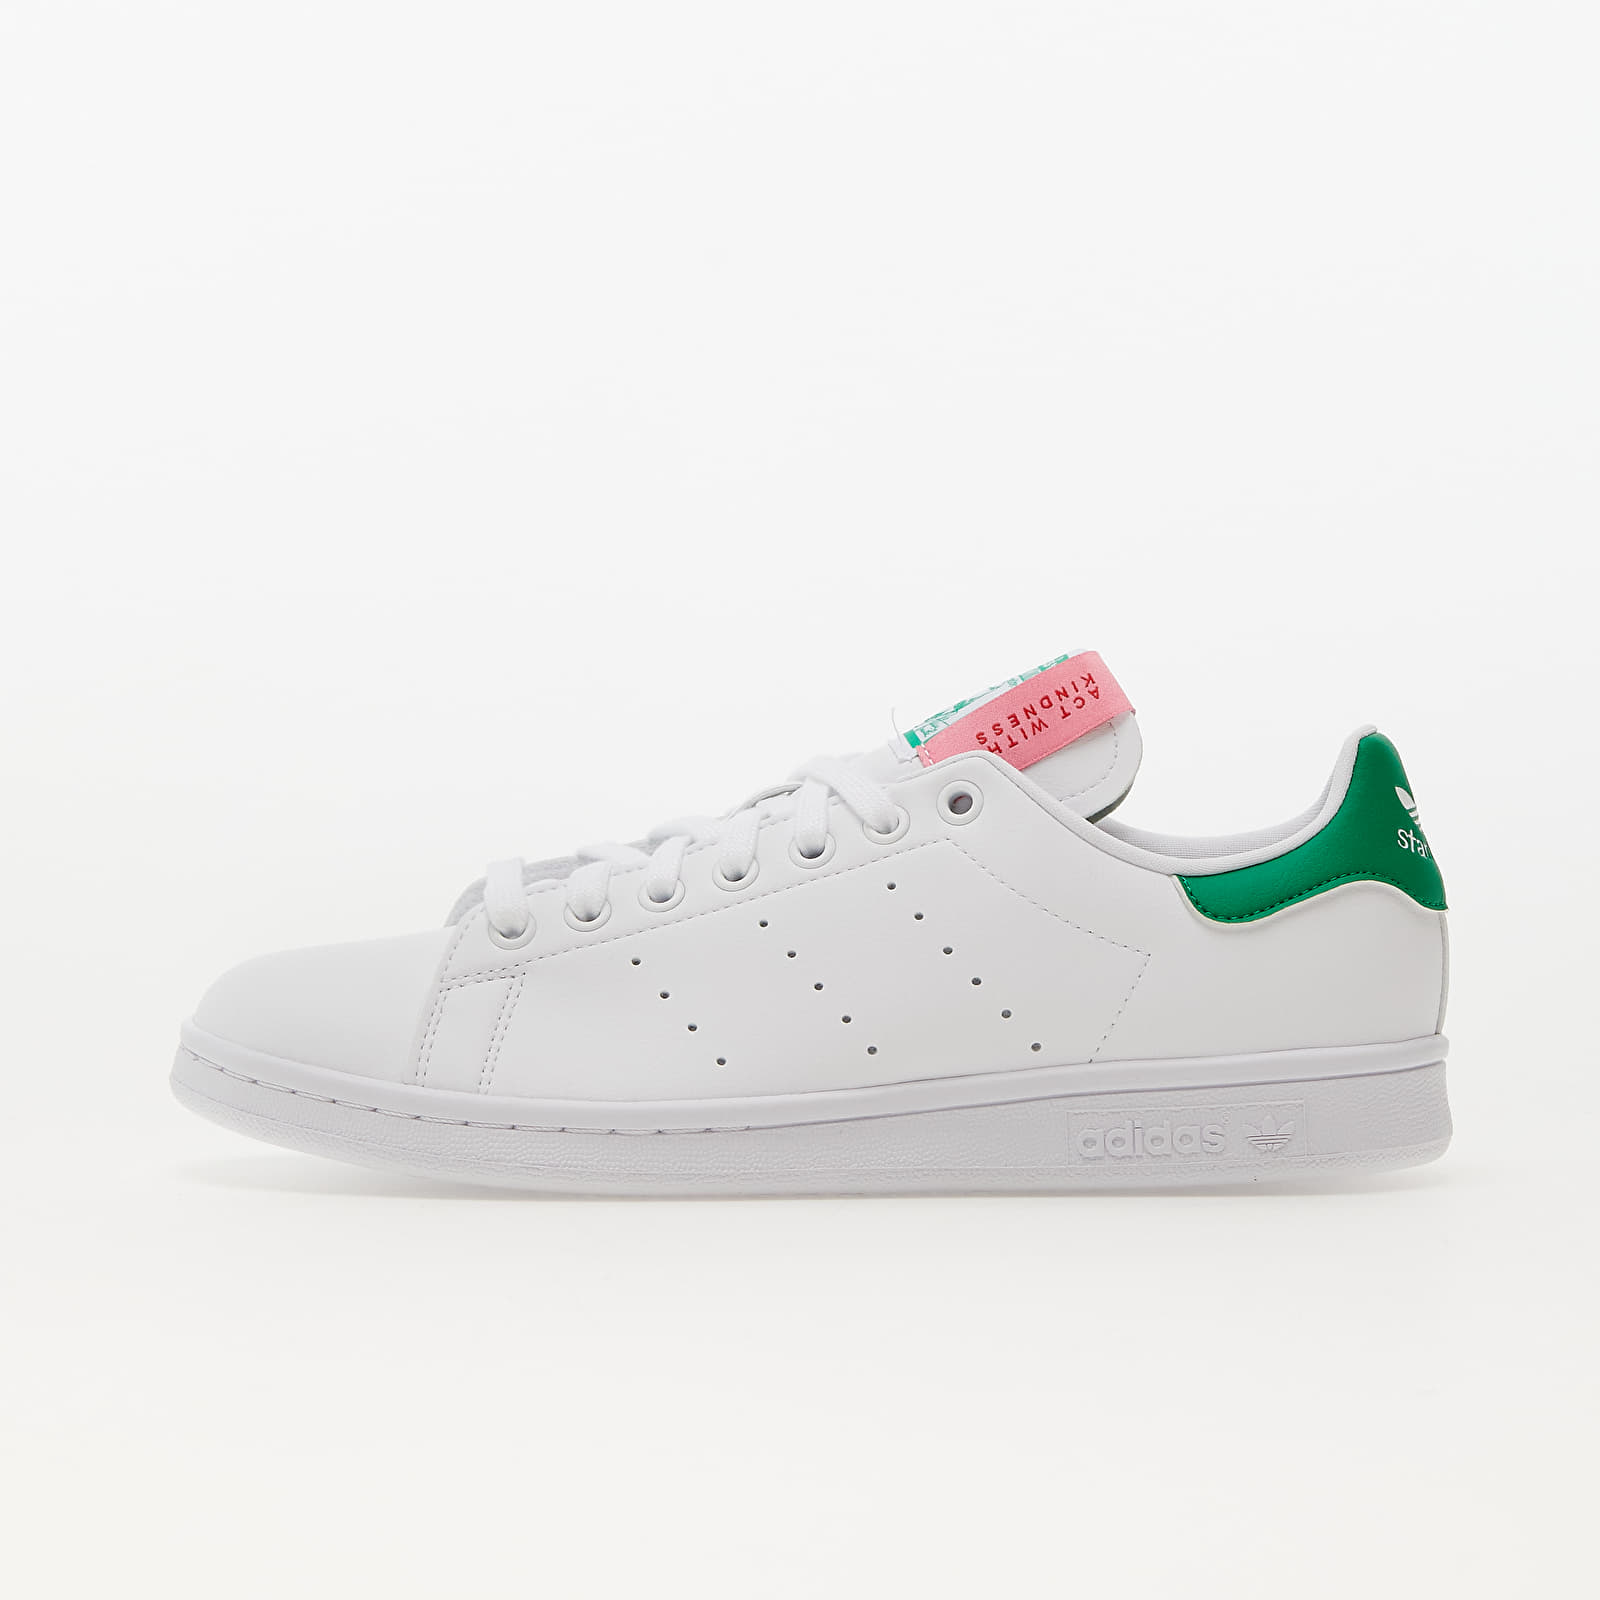 Women's shoes adidas Originals Stan Smith W Ftw White/ Green/ Bliss Pink